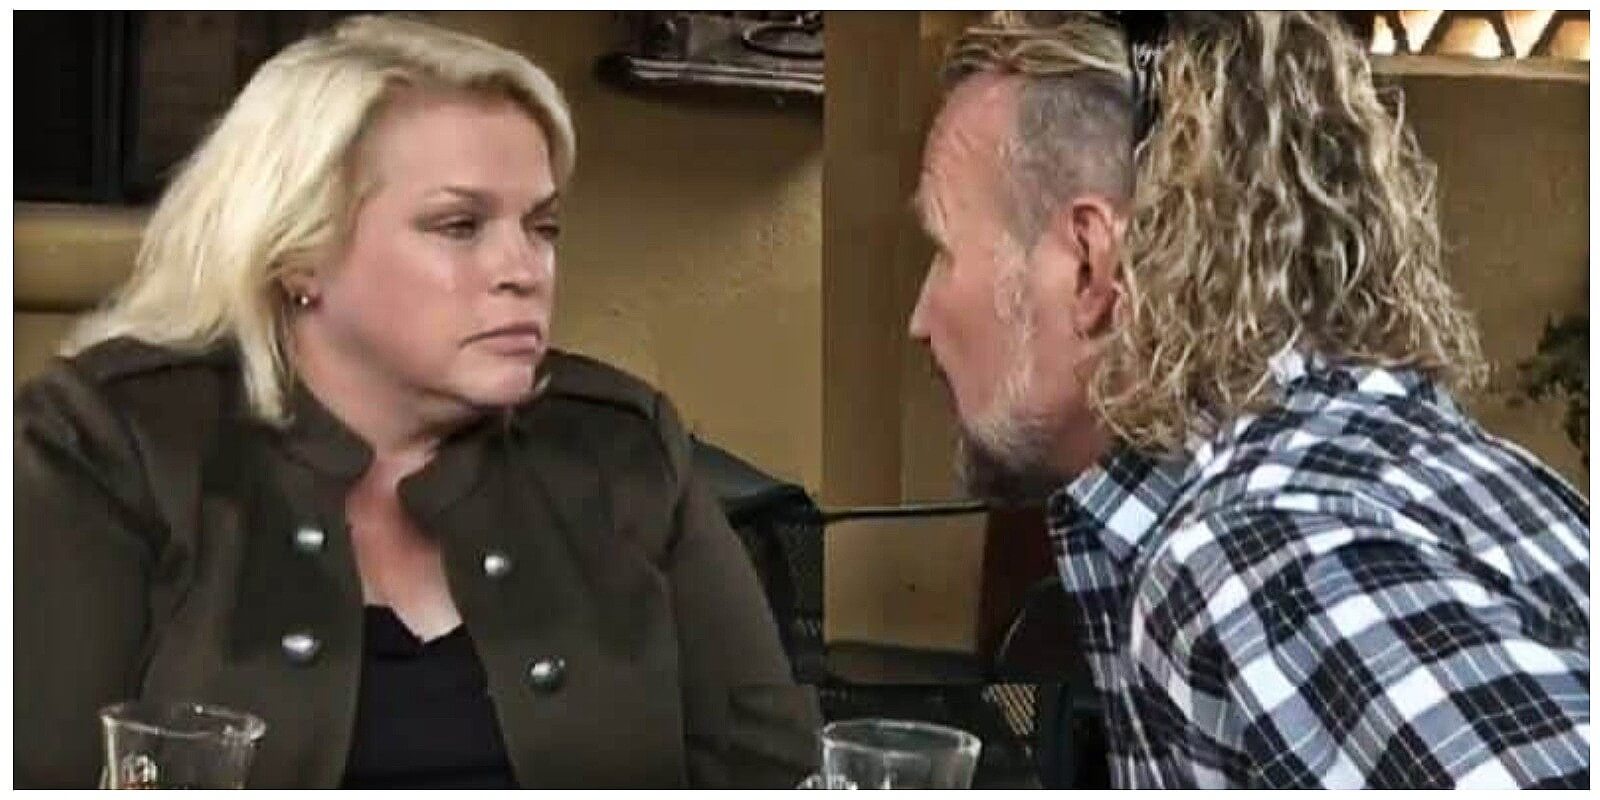 Janelle Brown and Kody Brown in a scene still from season 17 of TLC's 'Sister Wives.'